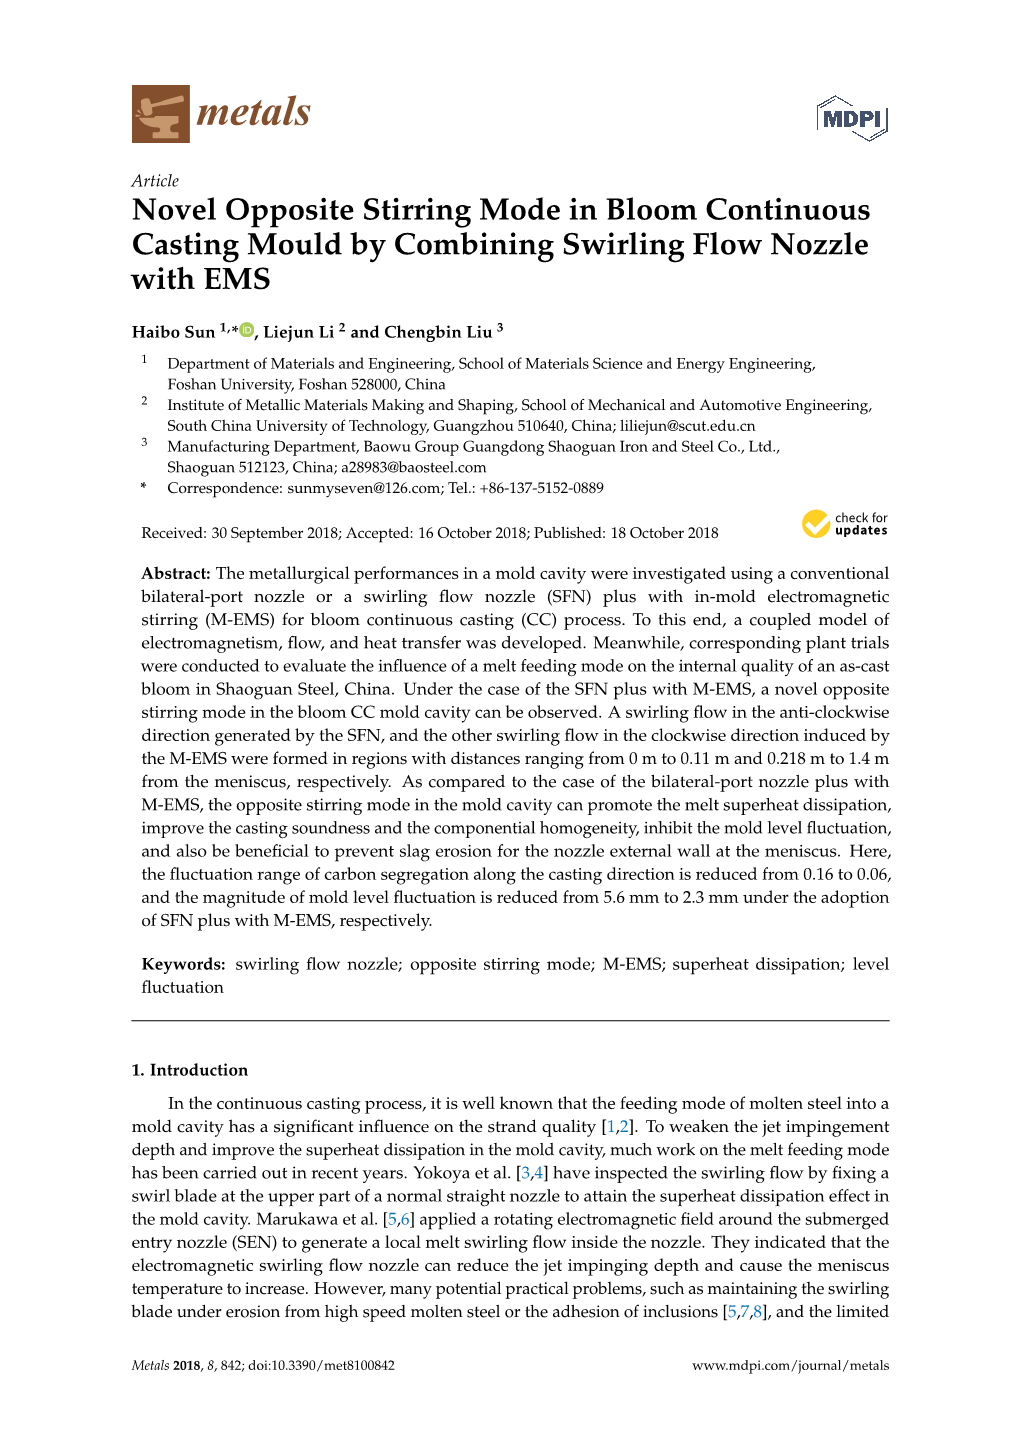 Novel Opposite Stirring Mode in Bloom Continuous Casting Mould by Combining Swirling Flow Nozzle with EMS